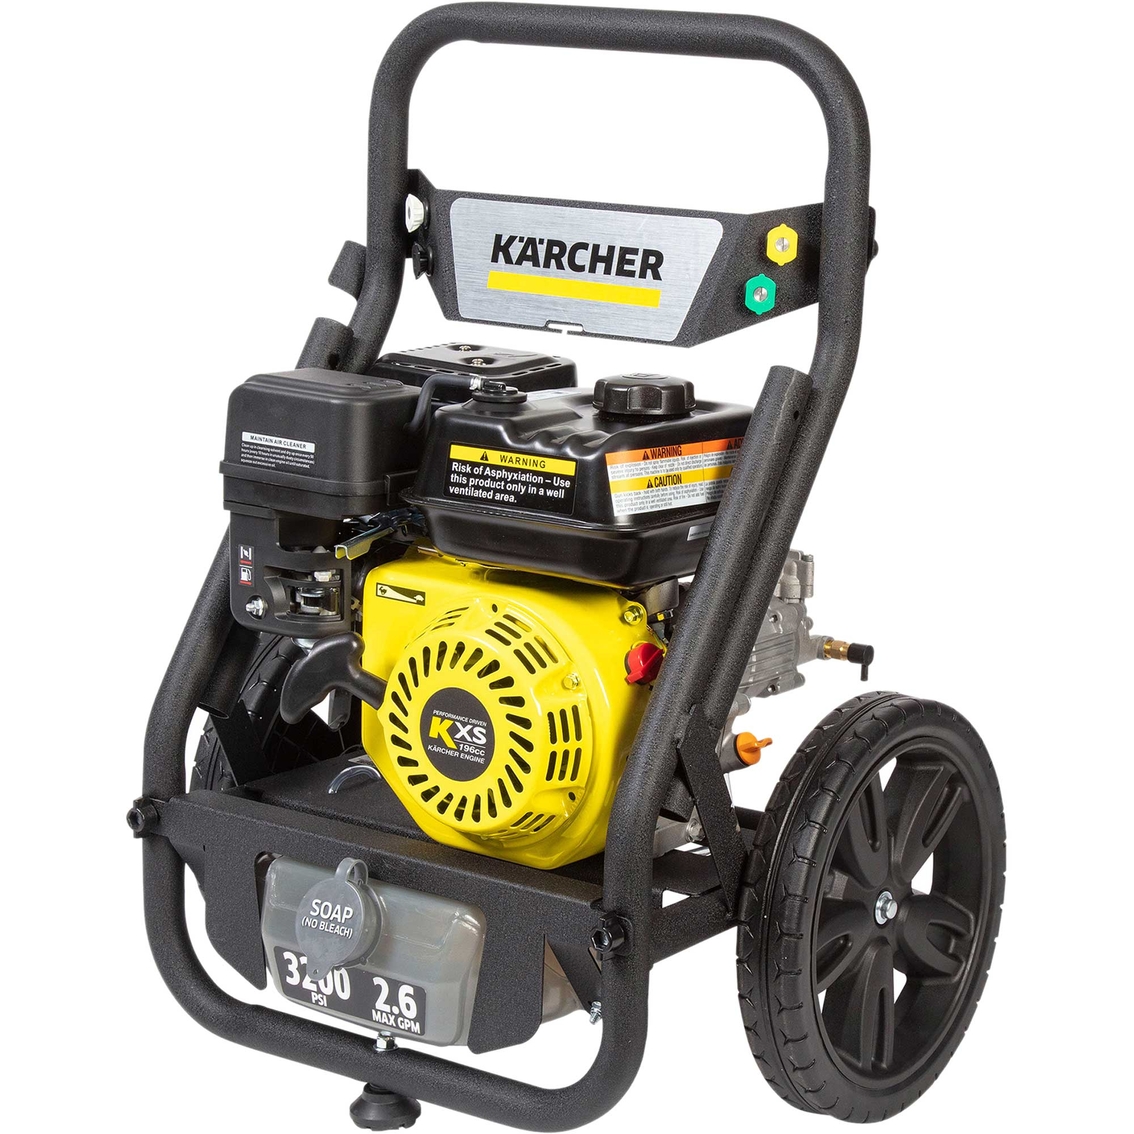 Karcher G 3200 Q 3200 PSI 2.6 GPM Axial Pump Gas Pressure Washer with 4 Nozzles - Image 5 of 7